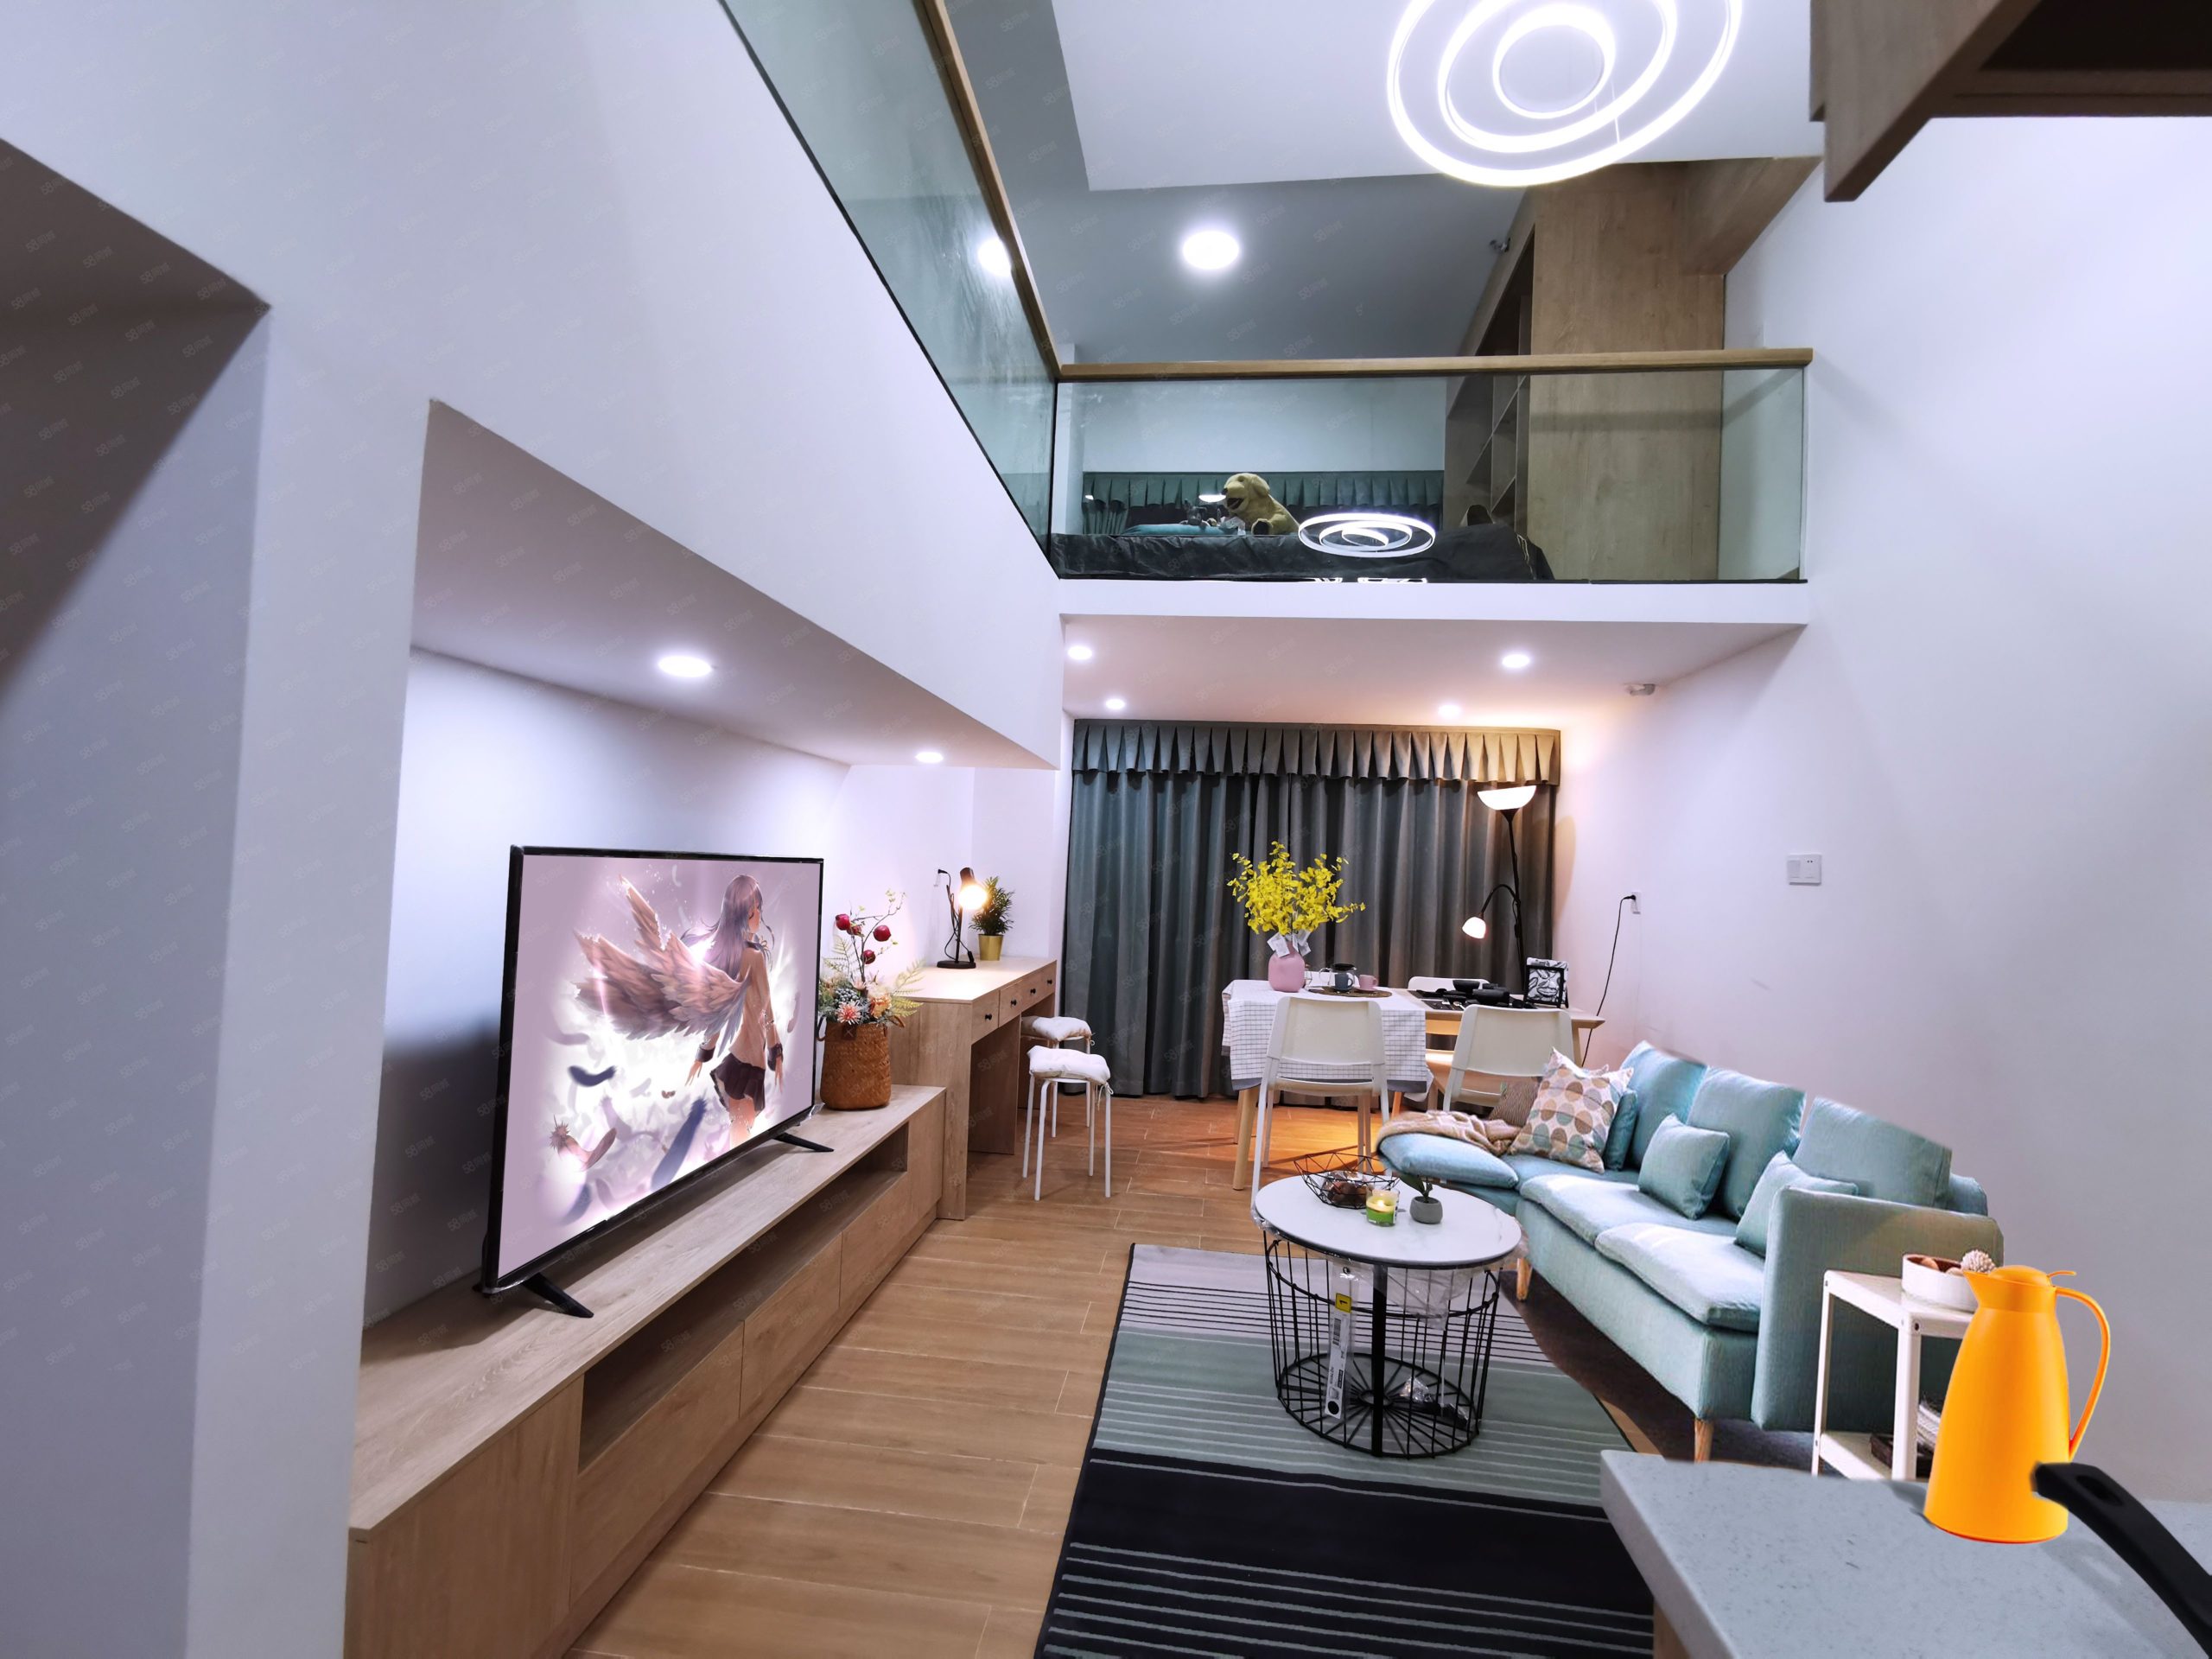 Featured image for “Big loft style apartment for rent in Nanshan”